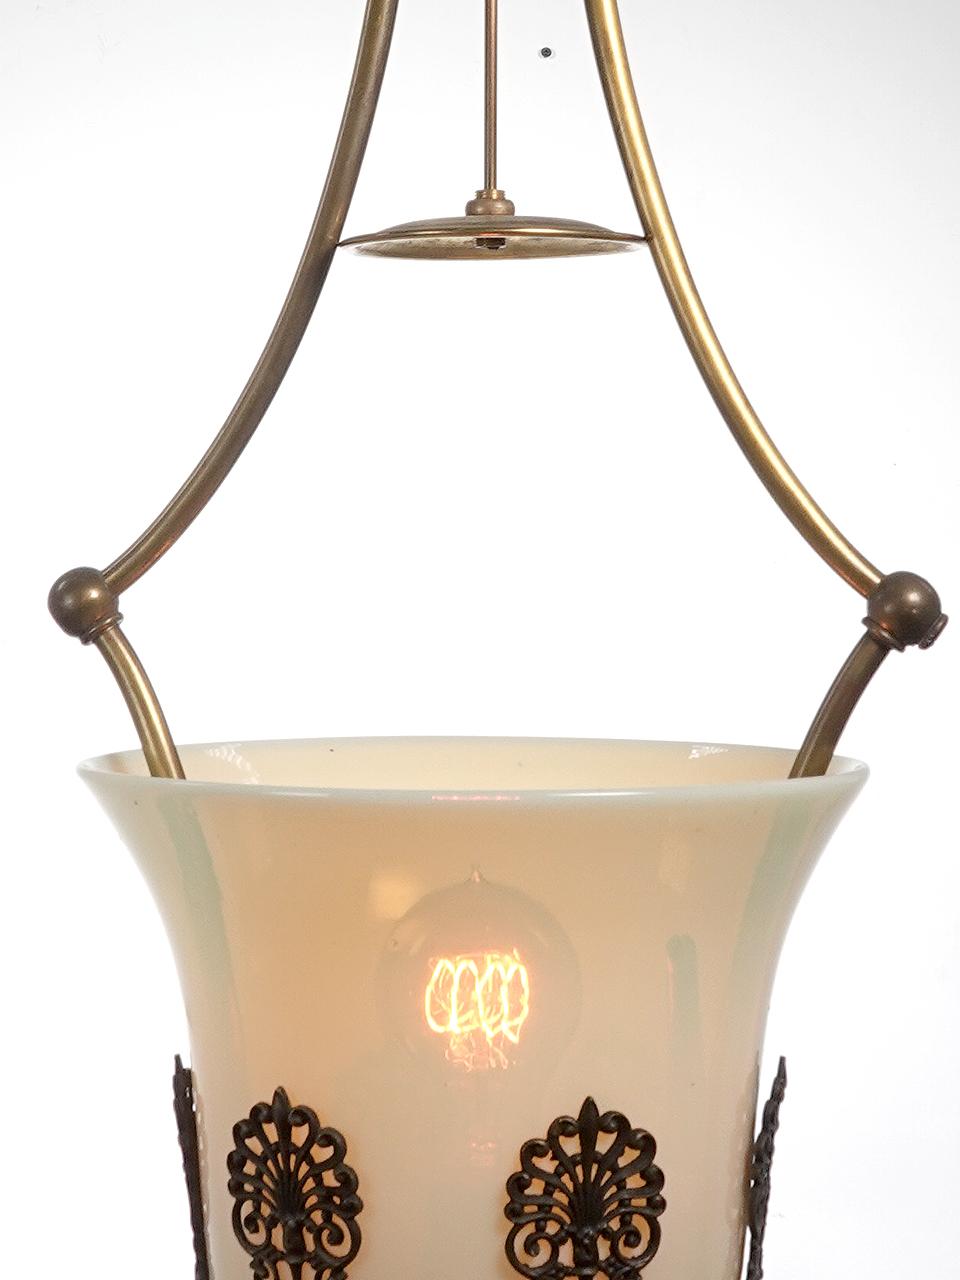 This was an early gas lamp that we carefully converted to electric.
The Vaseline glass shade is one of the largest we have offered. You just don't see many large Vaseline examples. The lamp is very vertical and nice for stairways are high ceilings.